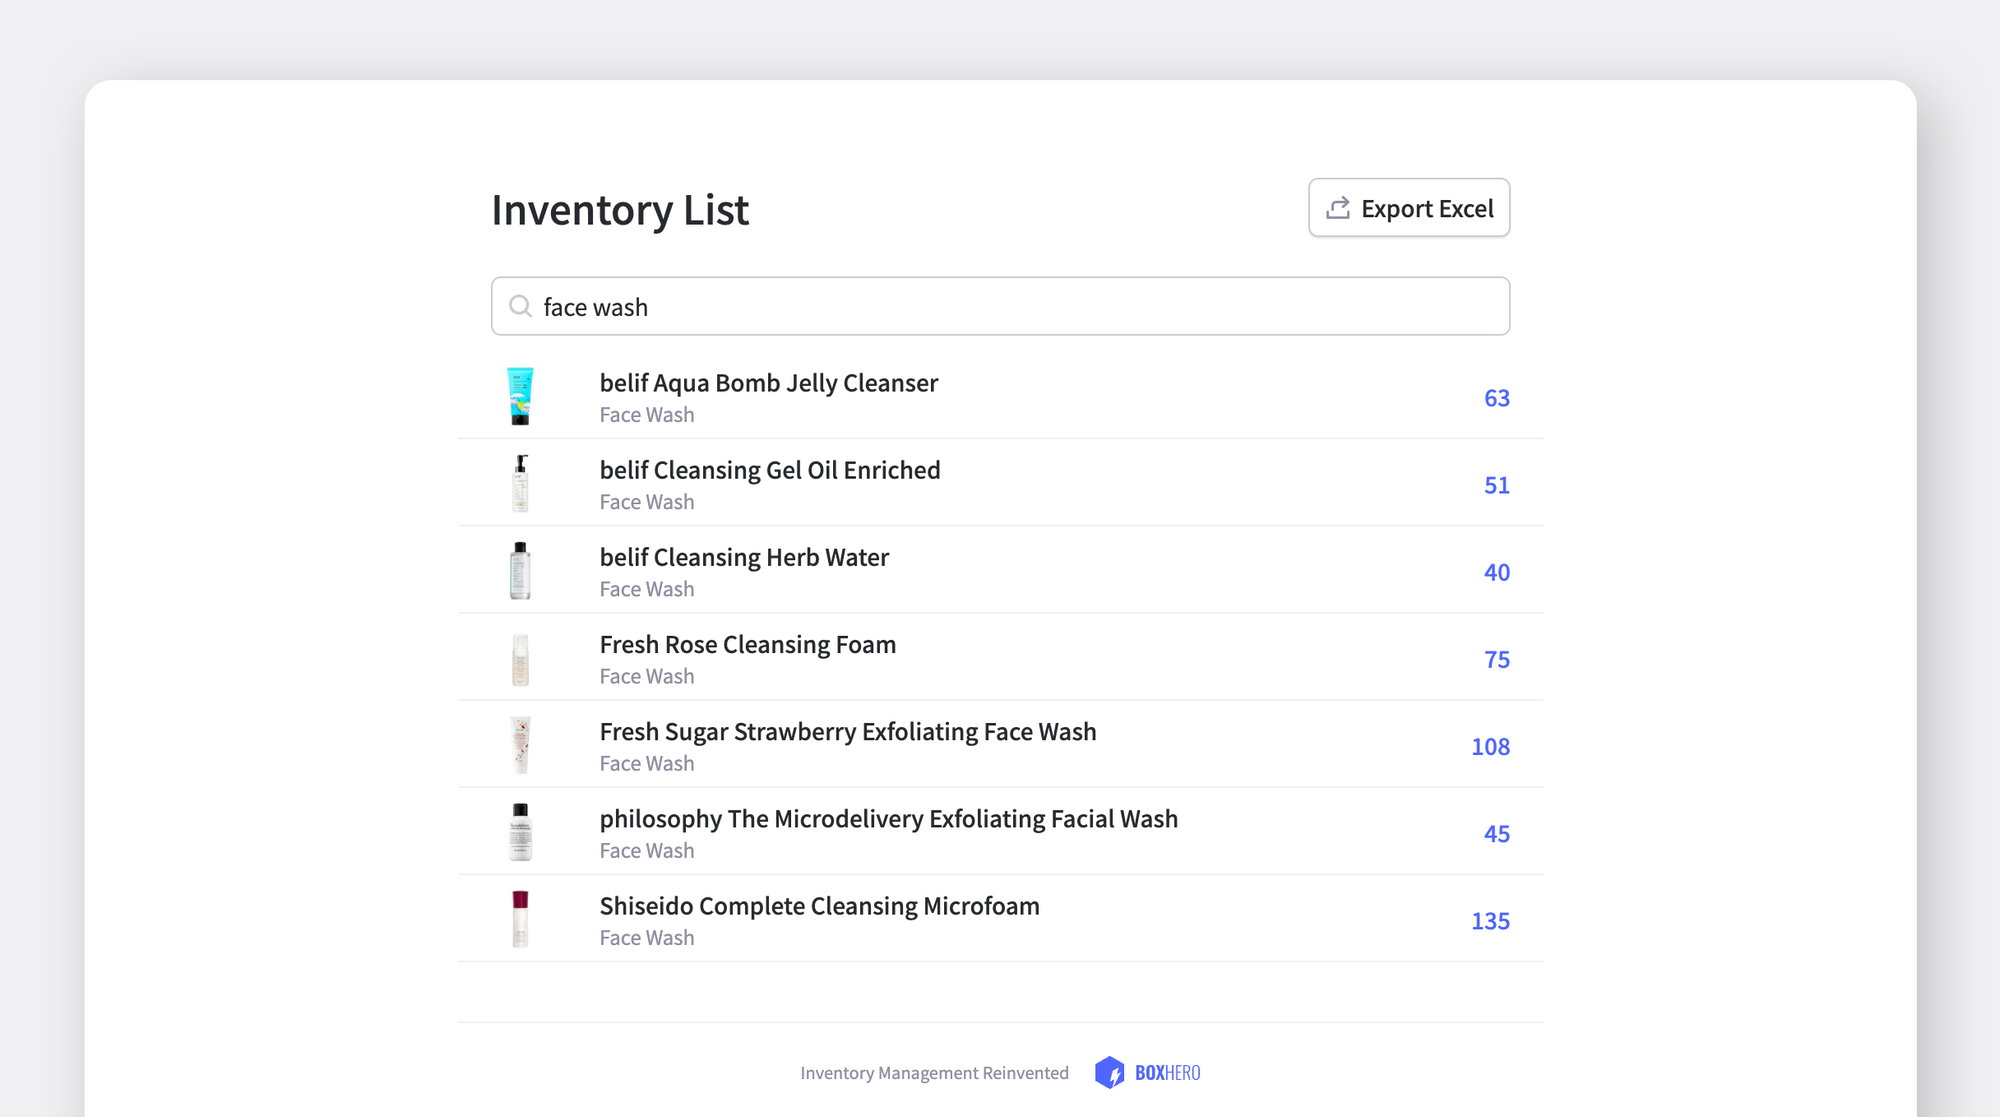 Search inventory on the shared inventory link